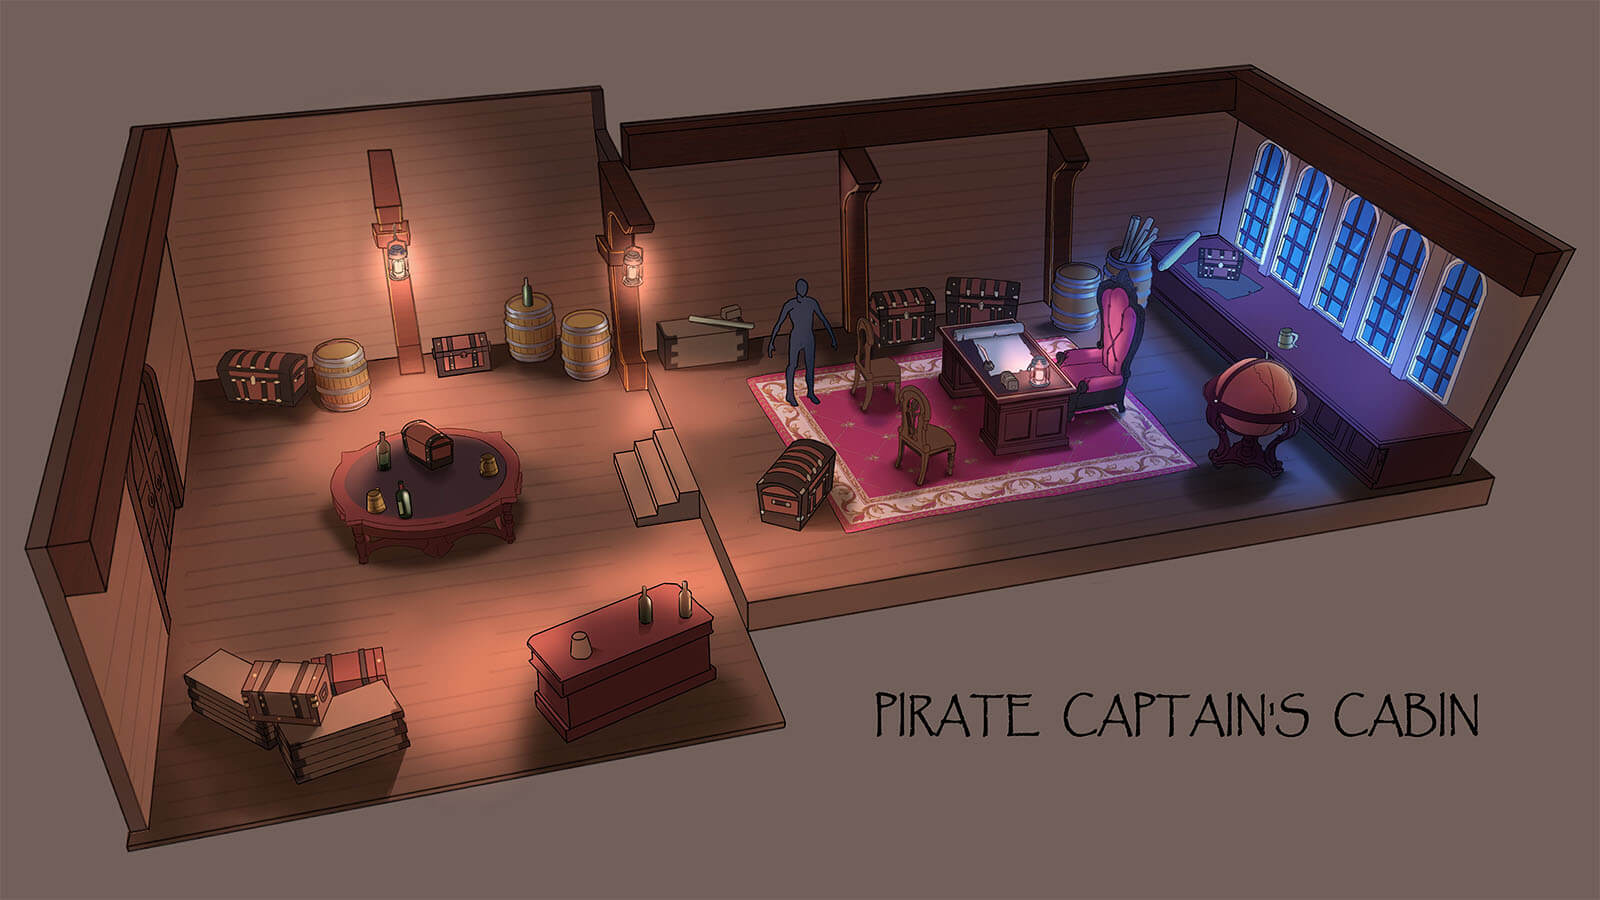 Isometric view of concept drawing of pirate's cabin quarters